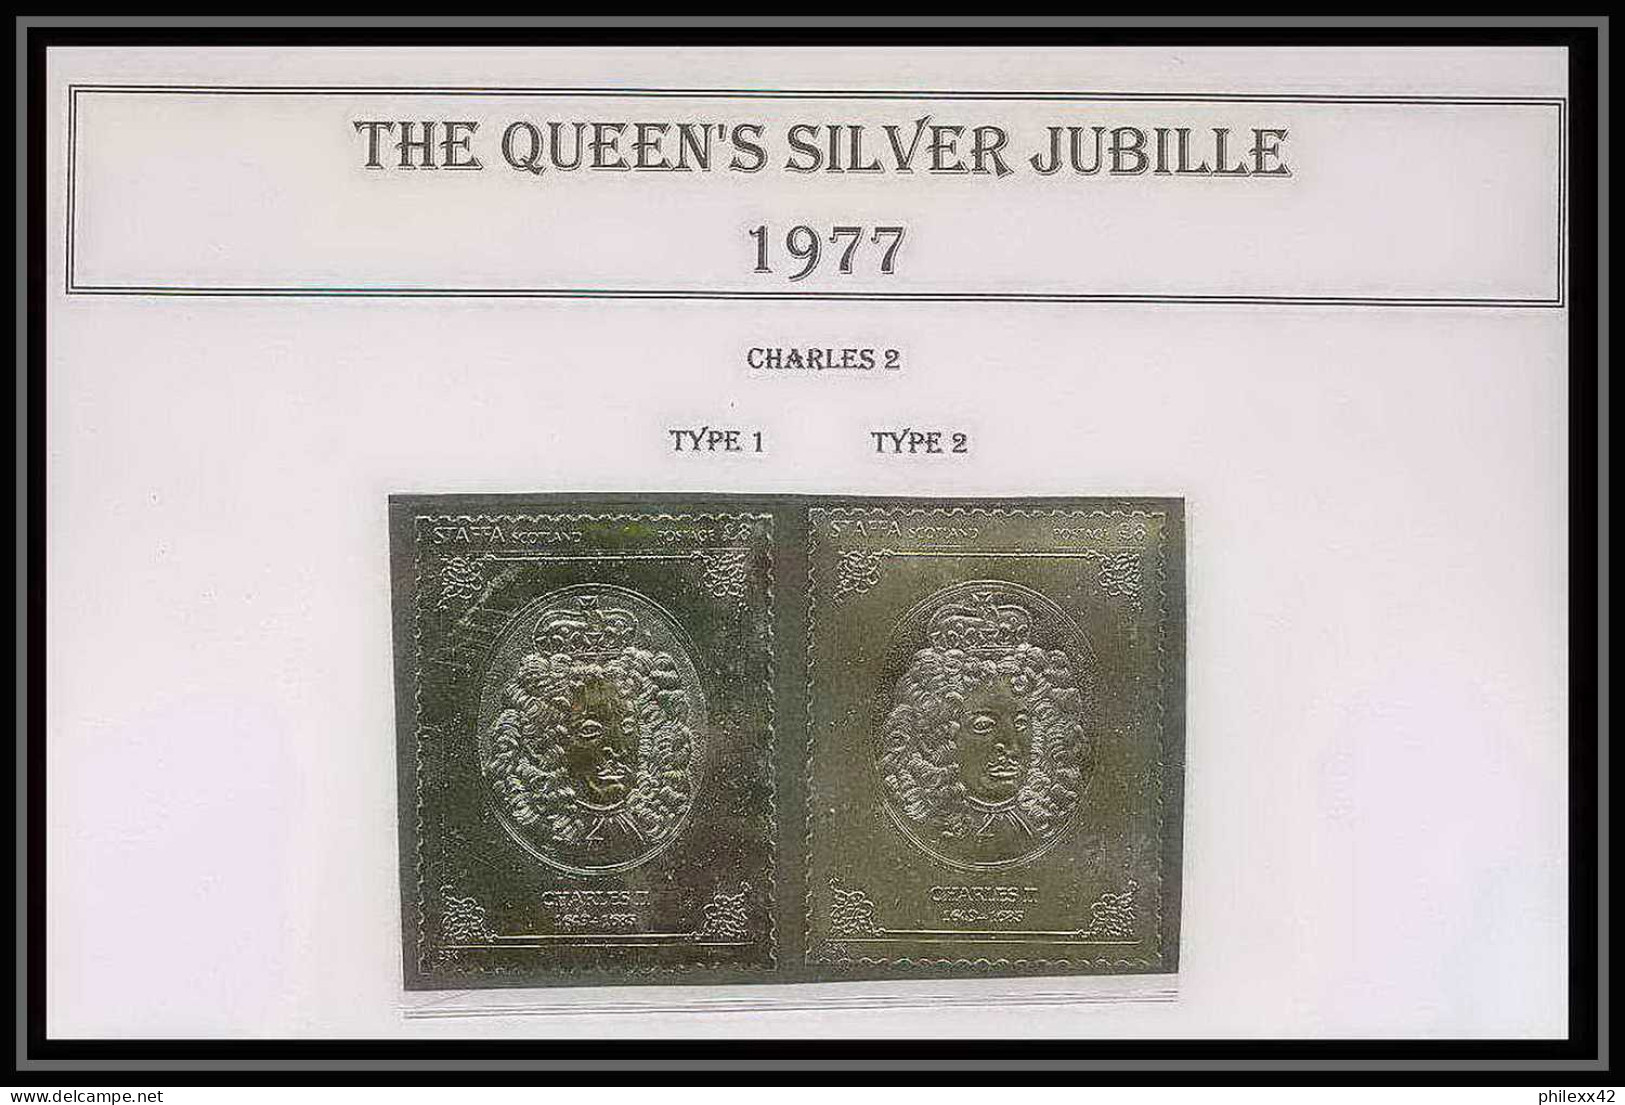 446a Staffa Scotland The Queen's Silver Jubilee 1977 OR Gold Stamps Monarchy United Kingdom Charles 2 Type 1&2 ** - Emissione Locali